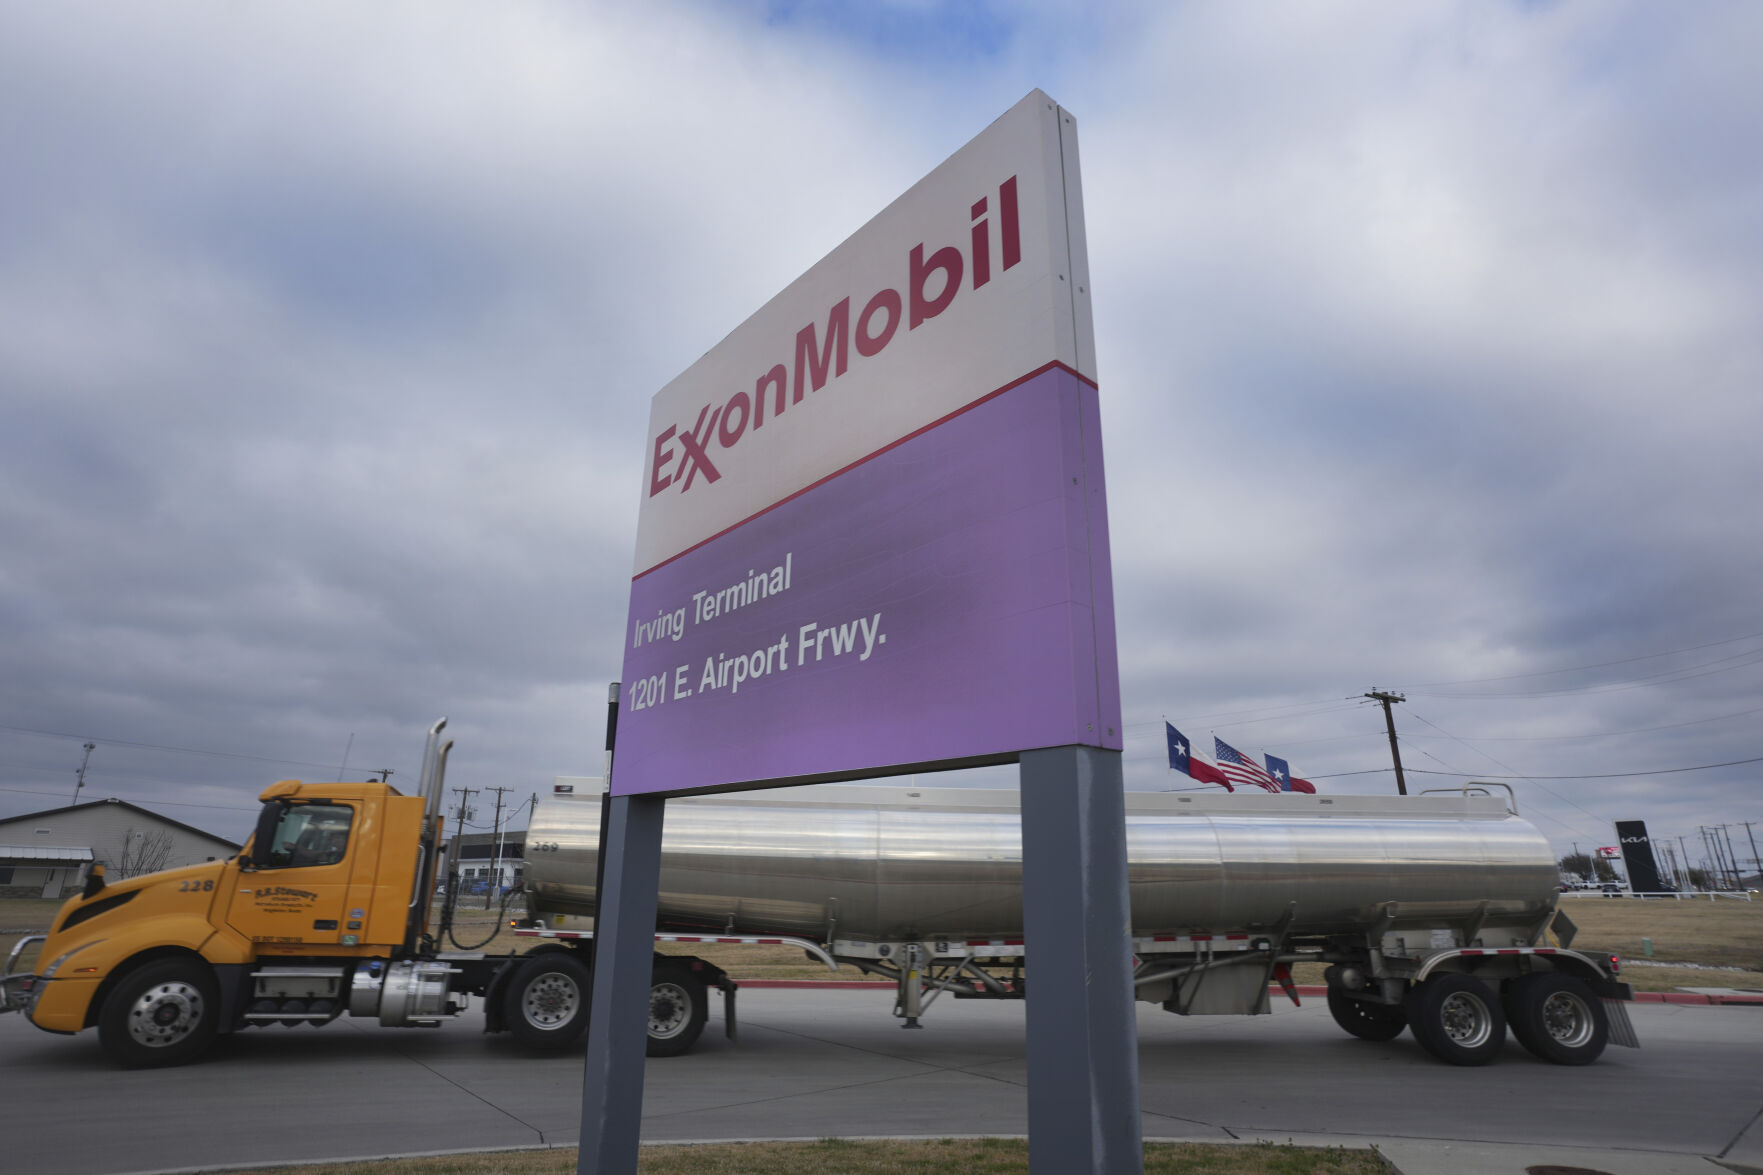 <p>A tanker pulls into an ExxonMobil fuel storage and distribution facility in Irving, Texas, Wednesday, Jan. 25, 2023. ExxonMobil reports their earnings Tuesday, Jan. 31. (AP Photo/LM Otero)</p>   PHOTO CREDIT: LM Otero 